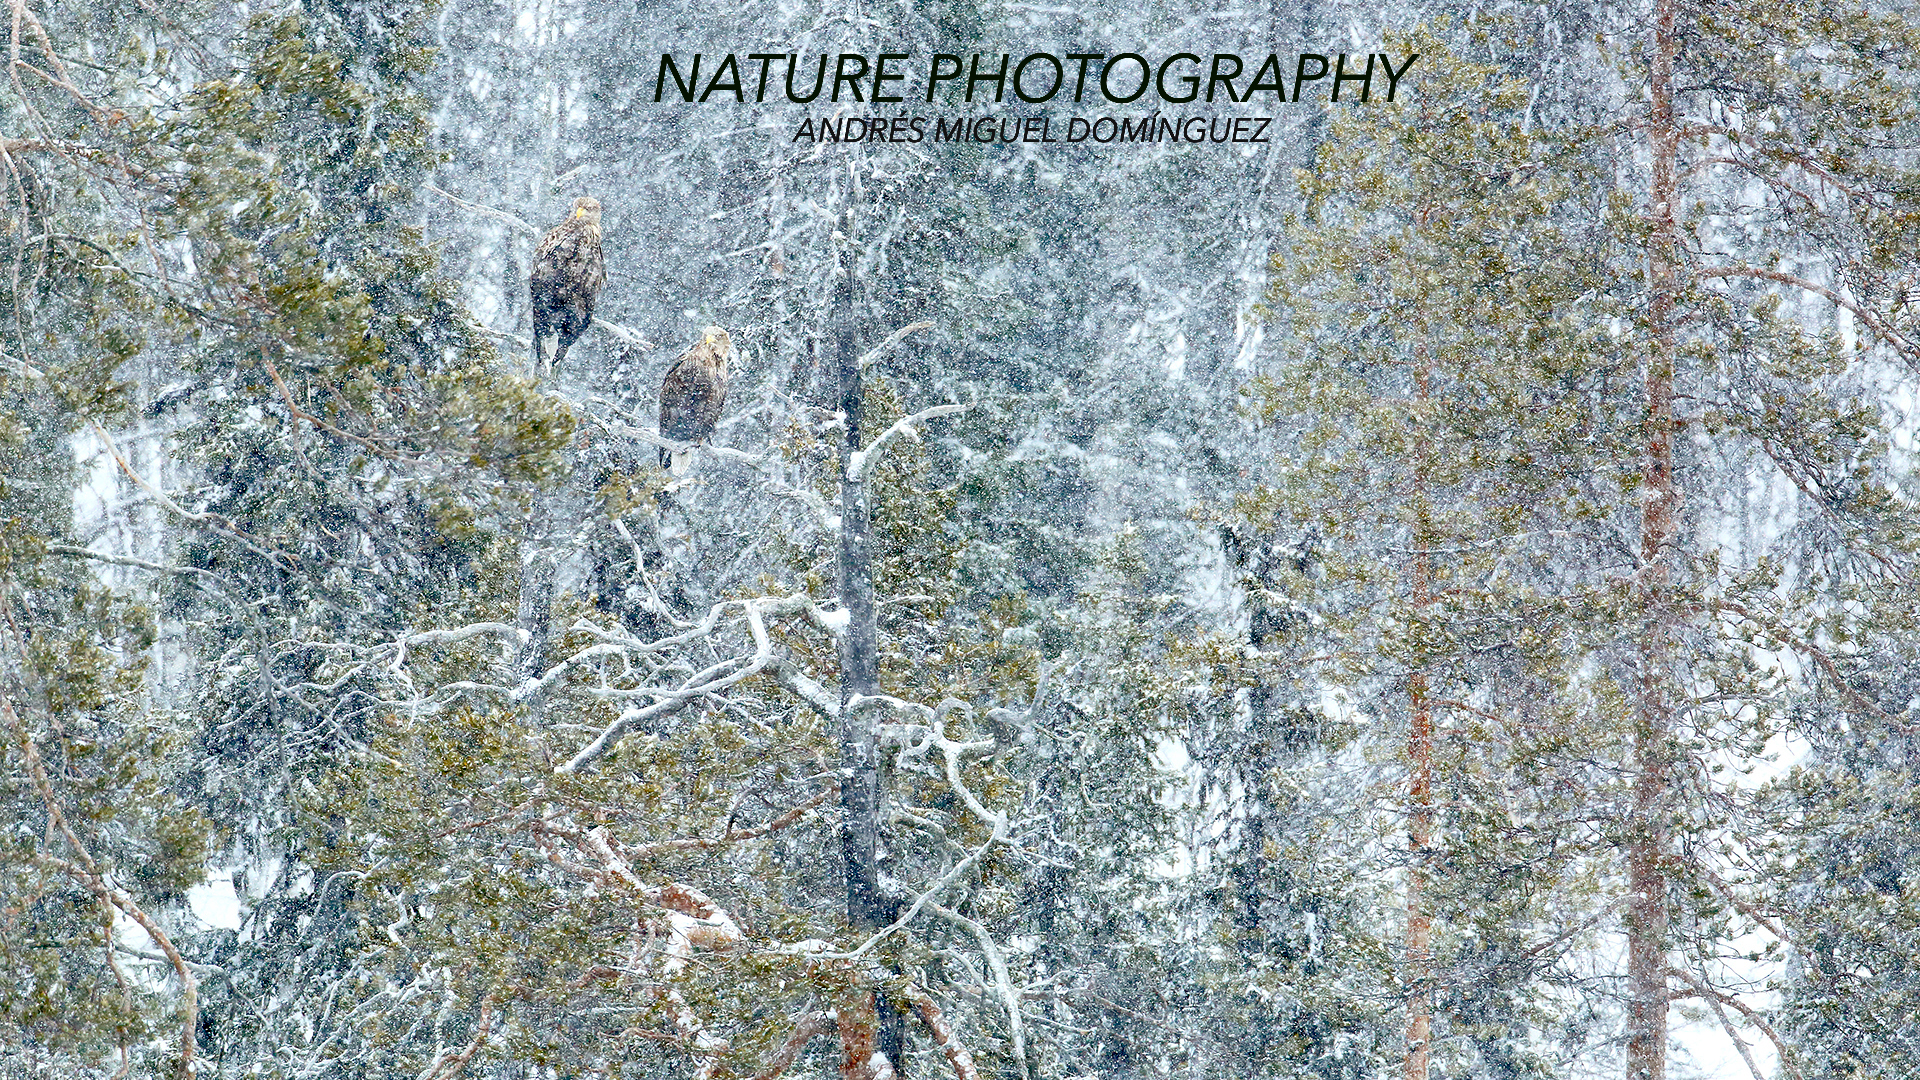 NATURE AND WILDLIFE PHOTOGRAPHY